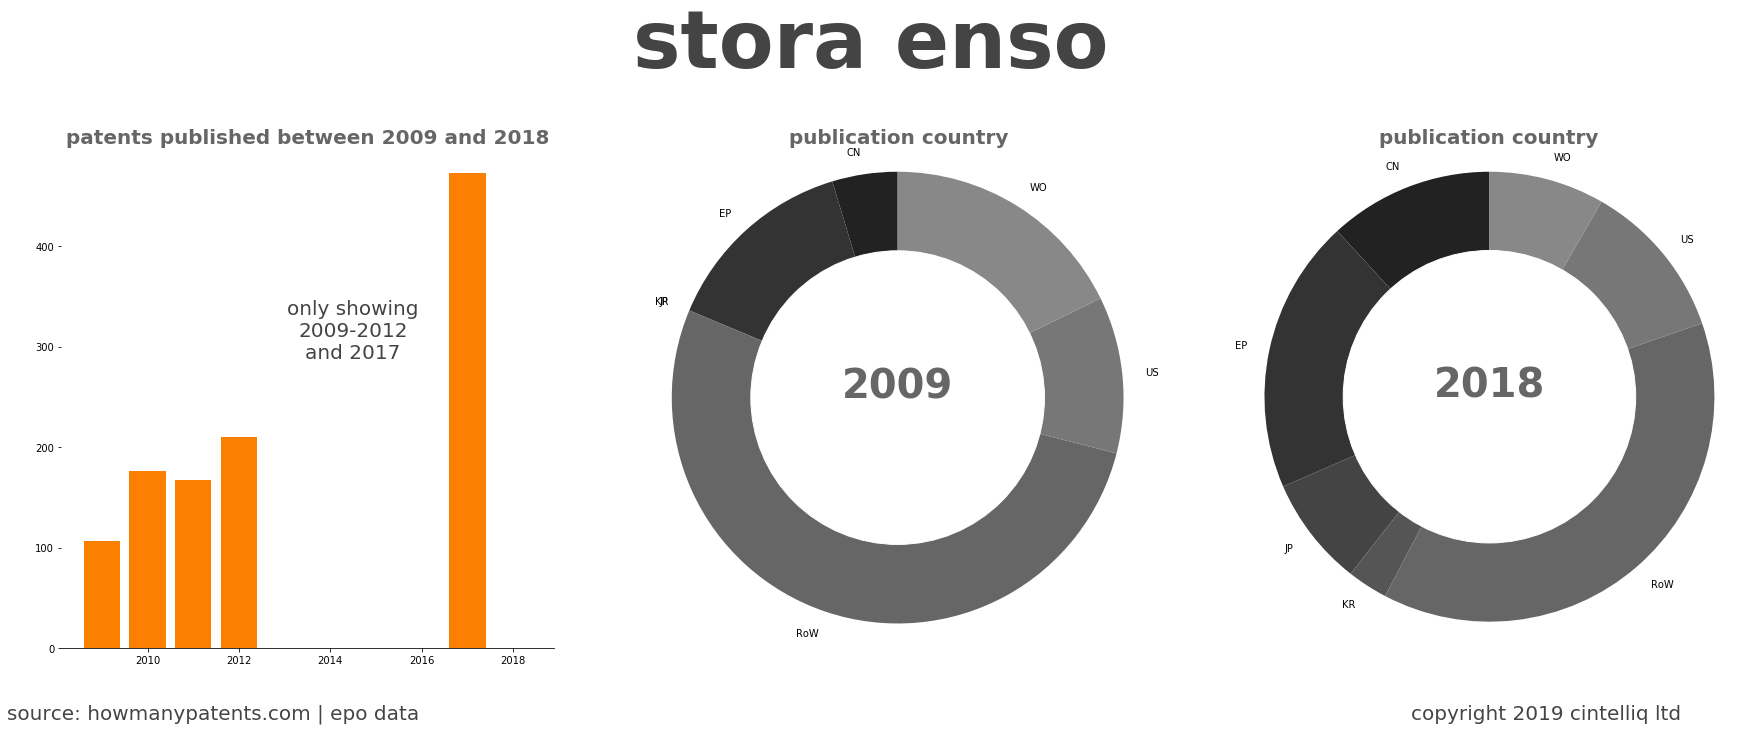 summary of patents for Stora Enso